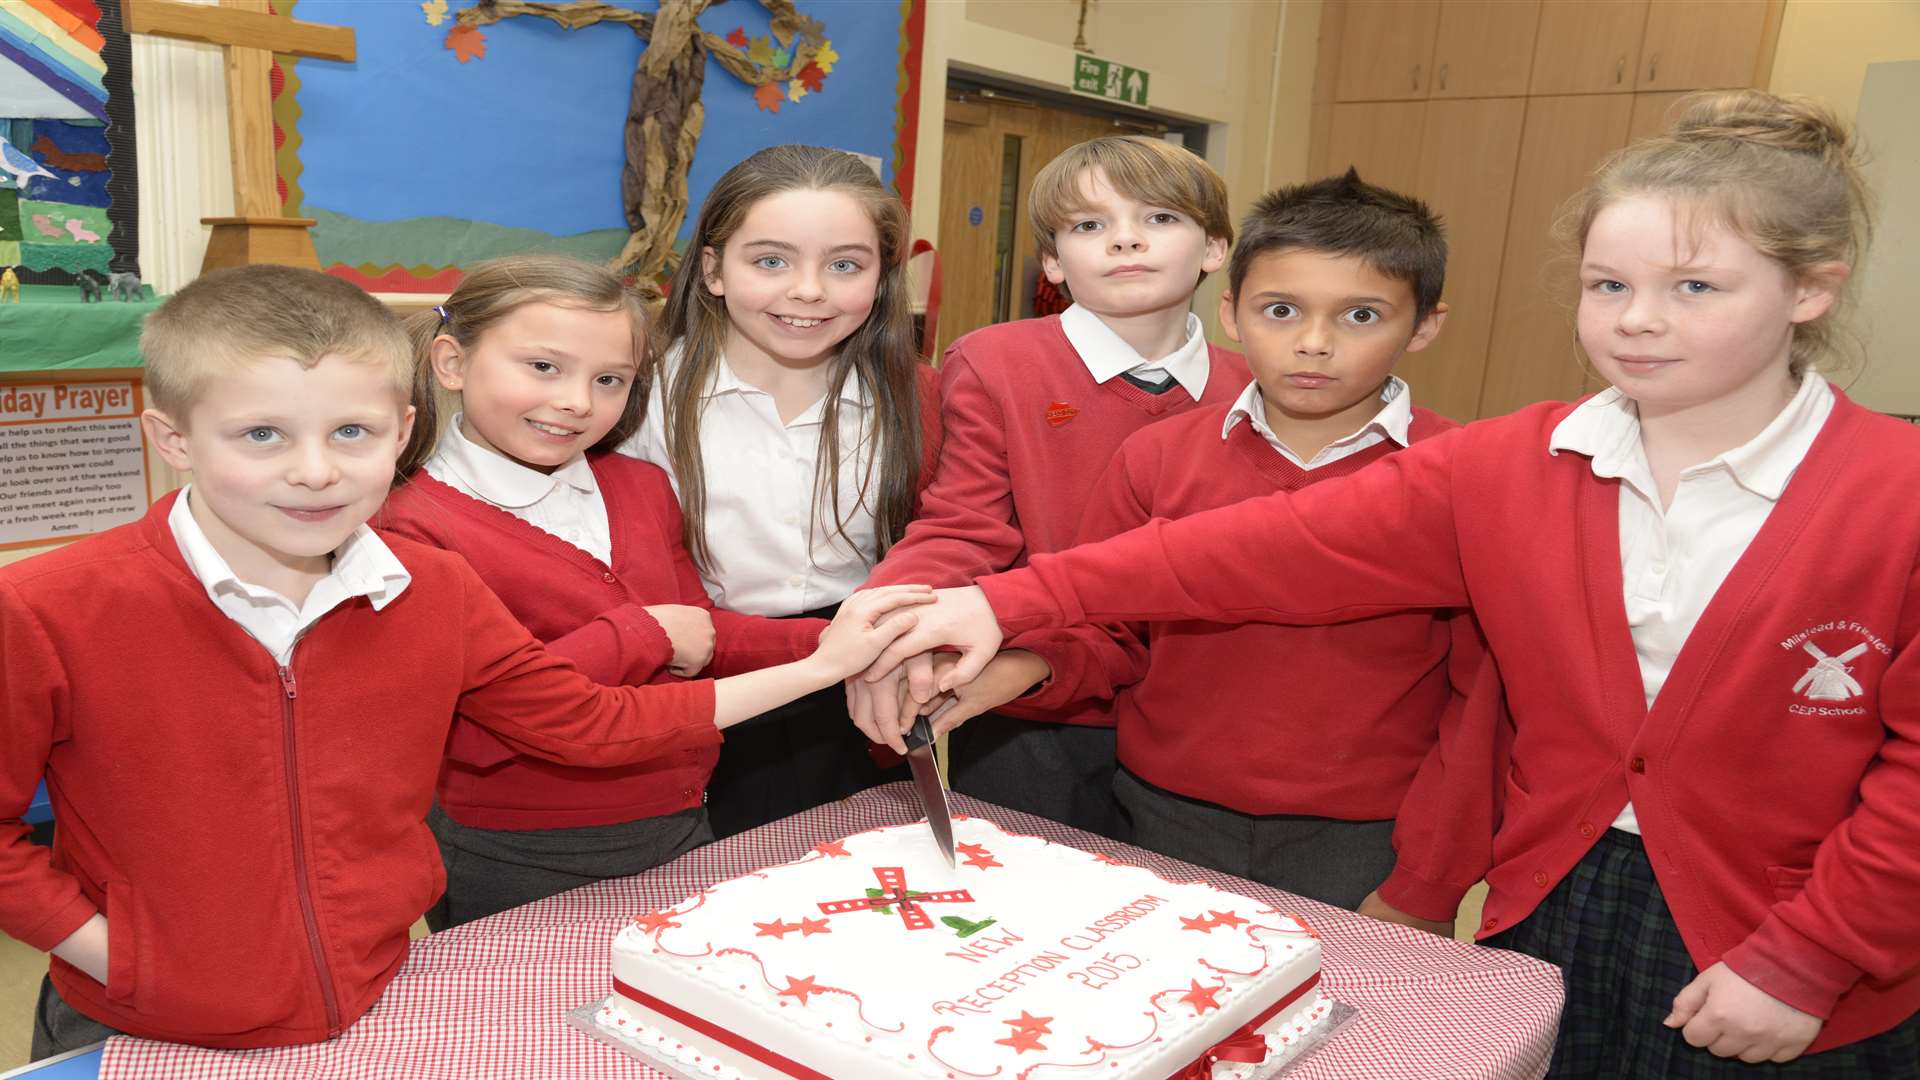 Members of the School Council cut a cake to mark the event